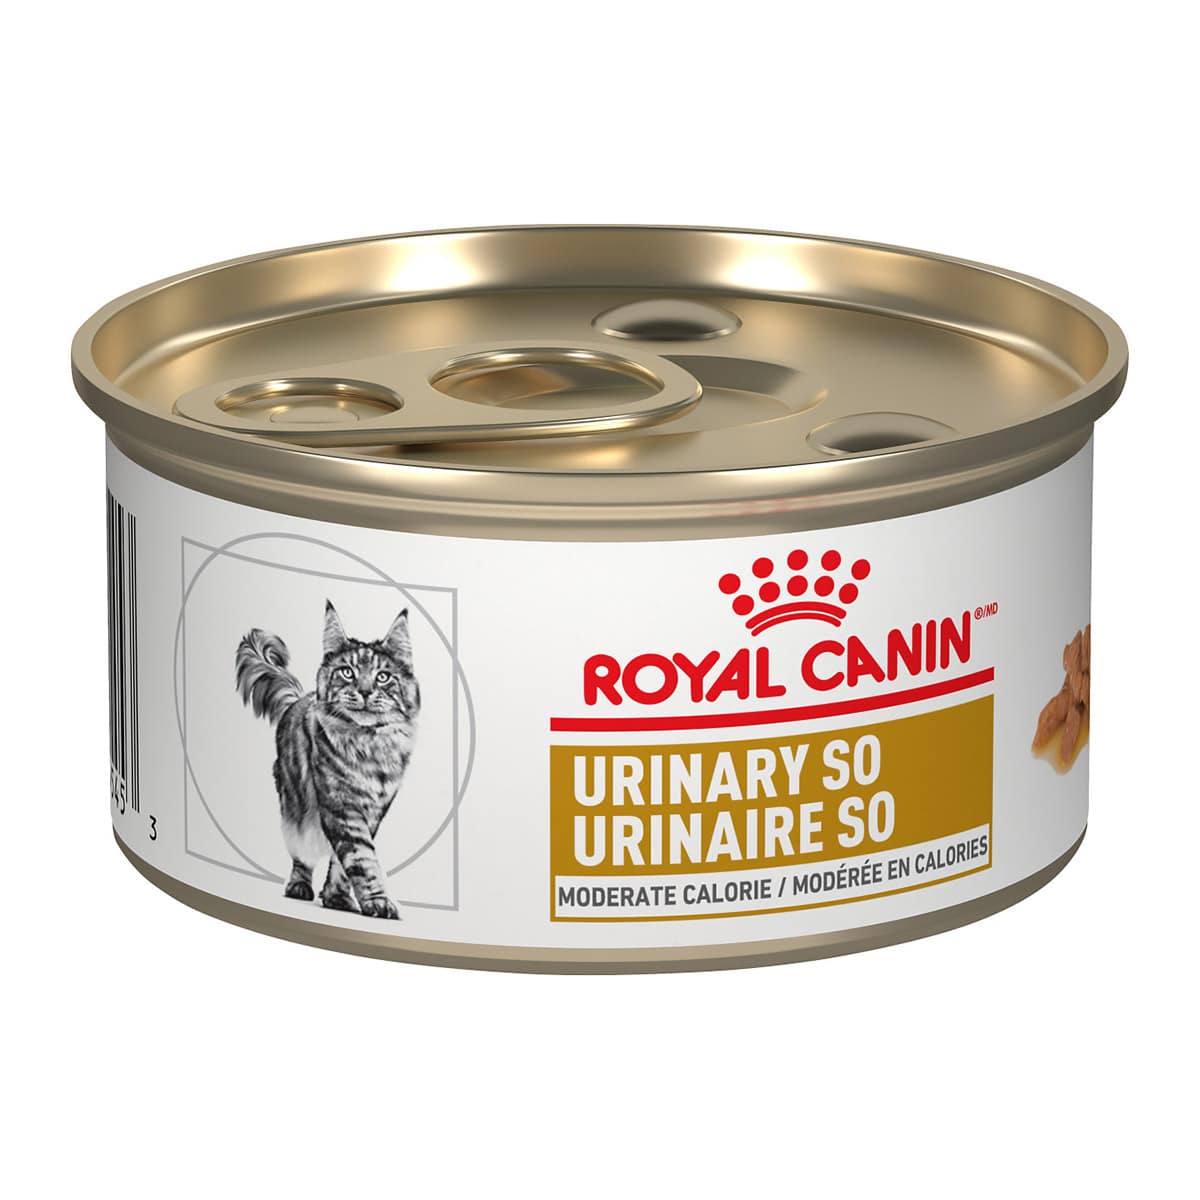 Grand Valley Animal Clinic. FELINE RC URINARY SO MODERATE CALORIE